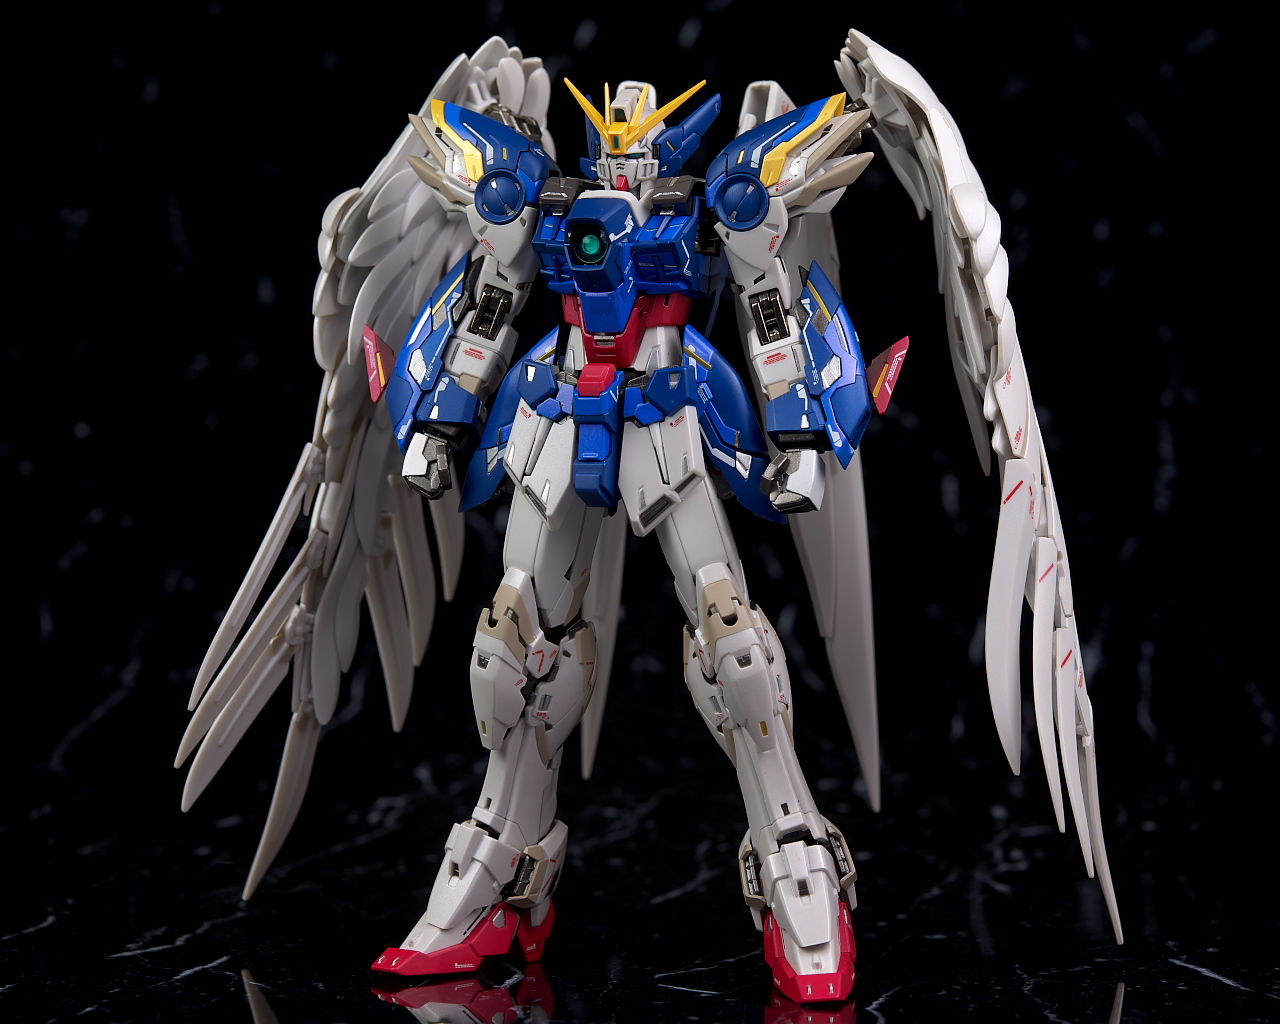 SALE／91%OFF】 メタルコンポジット ウイングガンダムゼロ Noble Color